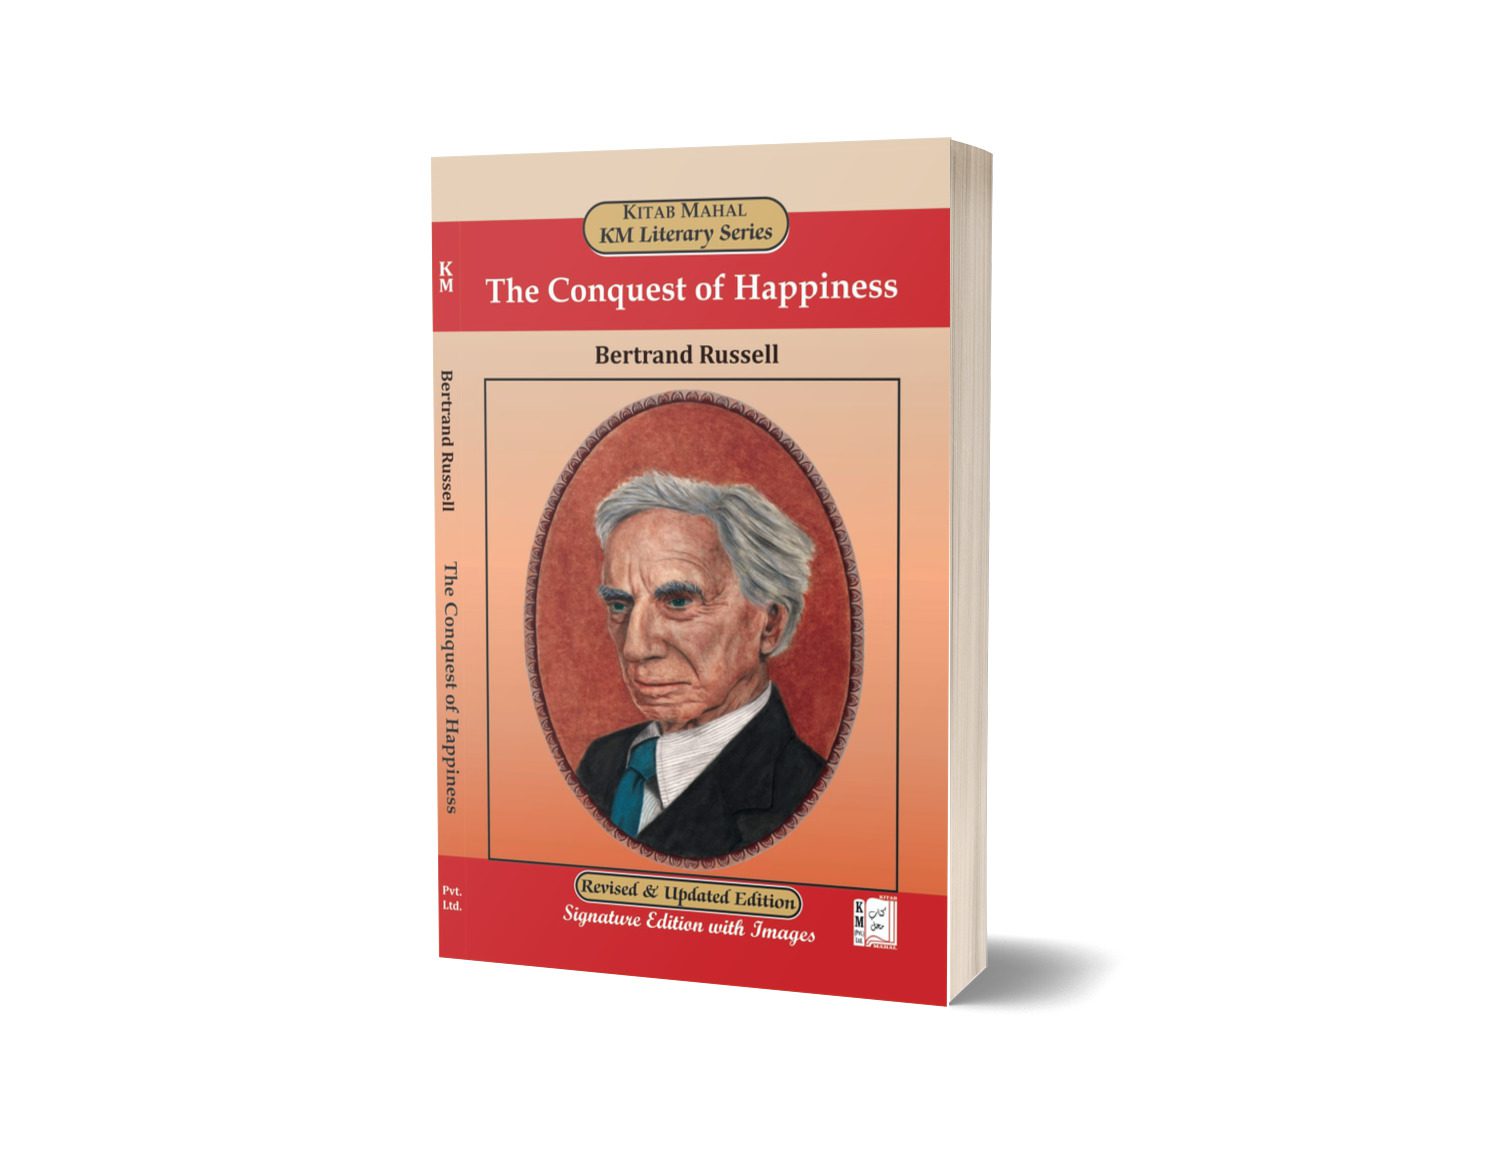 The Conquest of Happiness By Bestrand Russell - Kitab Mehal